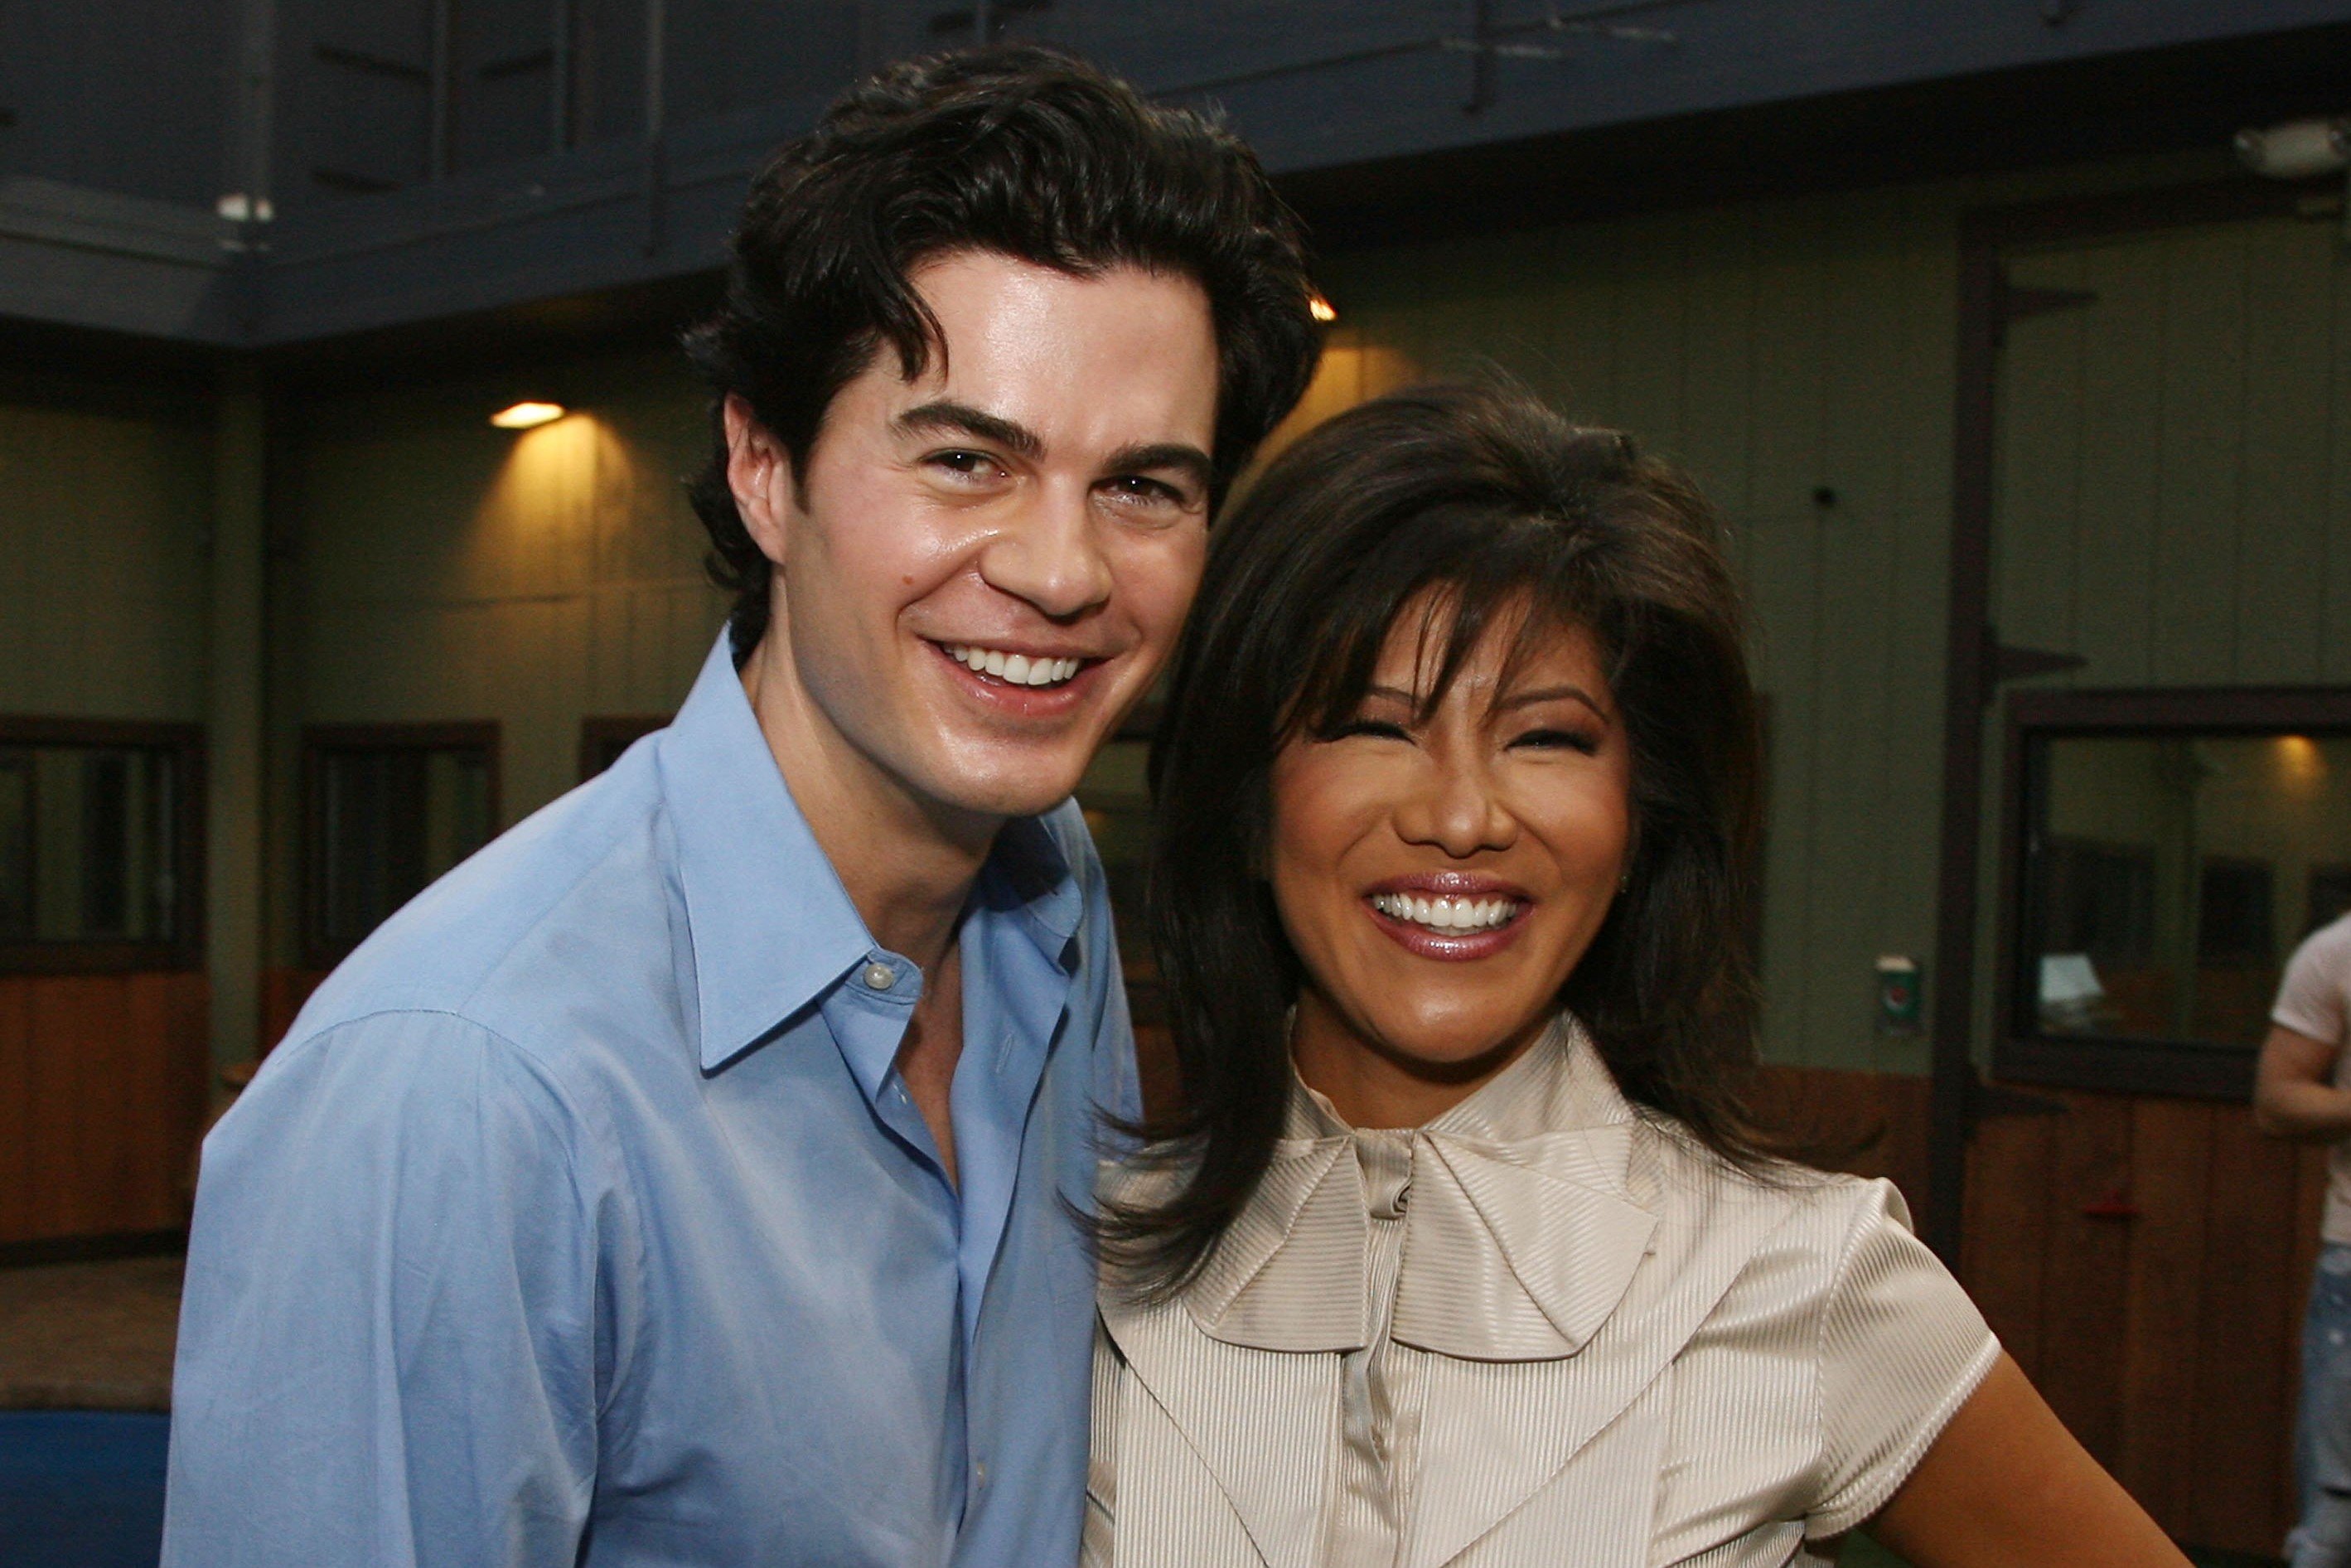 Will Kirby, the winner of 'Big Brother 2,' and Julie Chen Moonves, the host of 'Big Brother' on CBS,